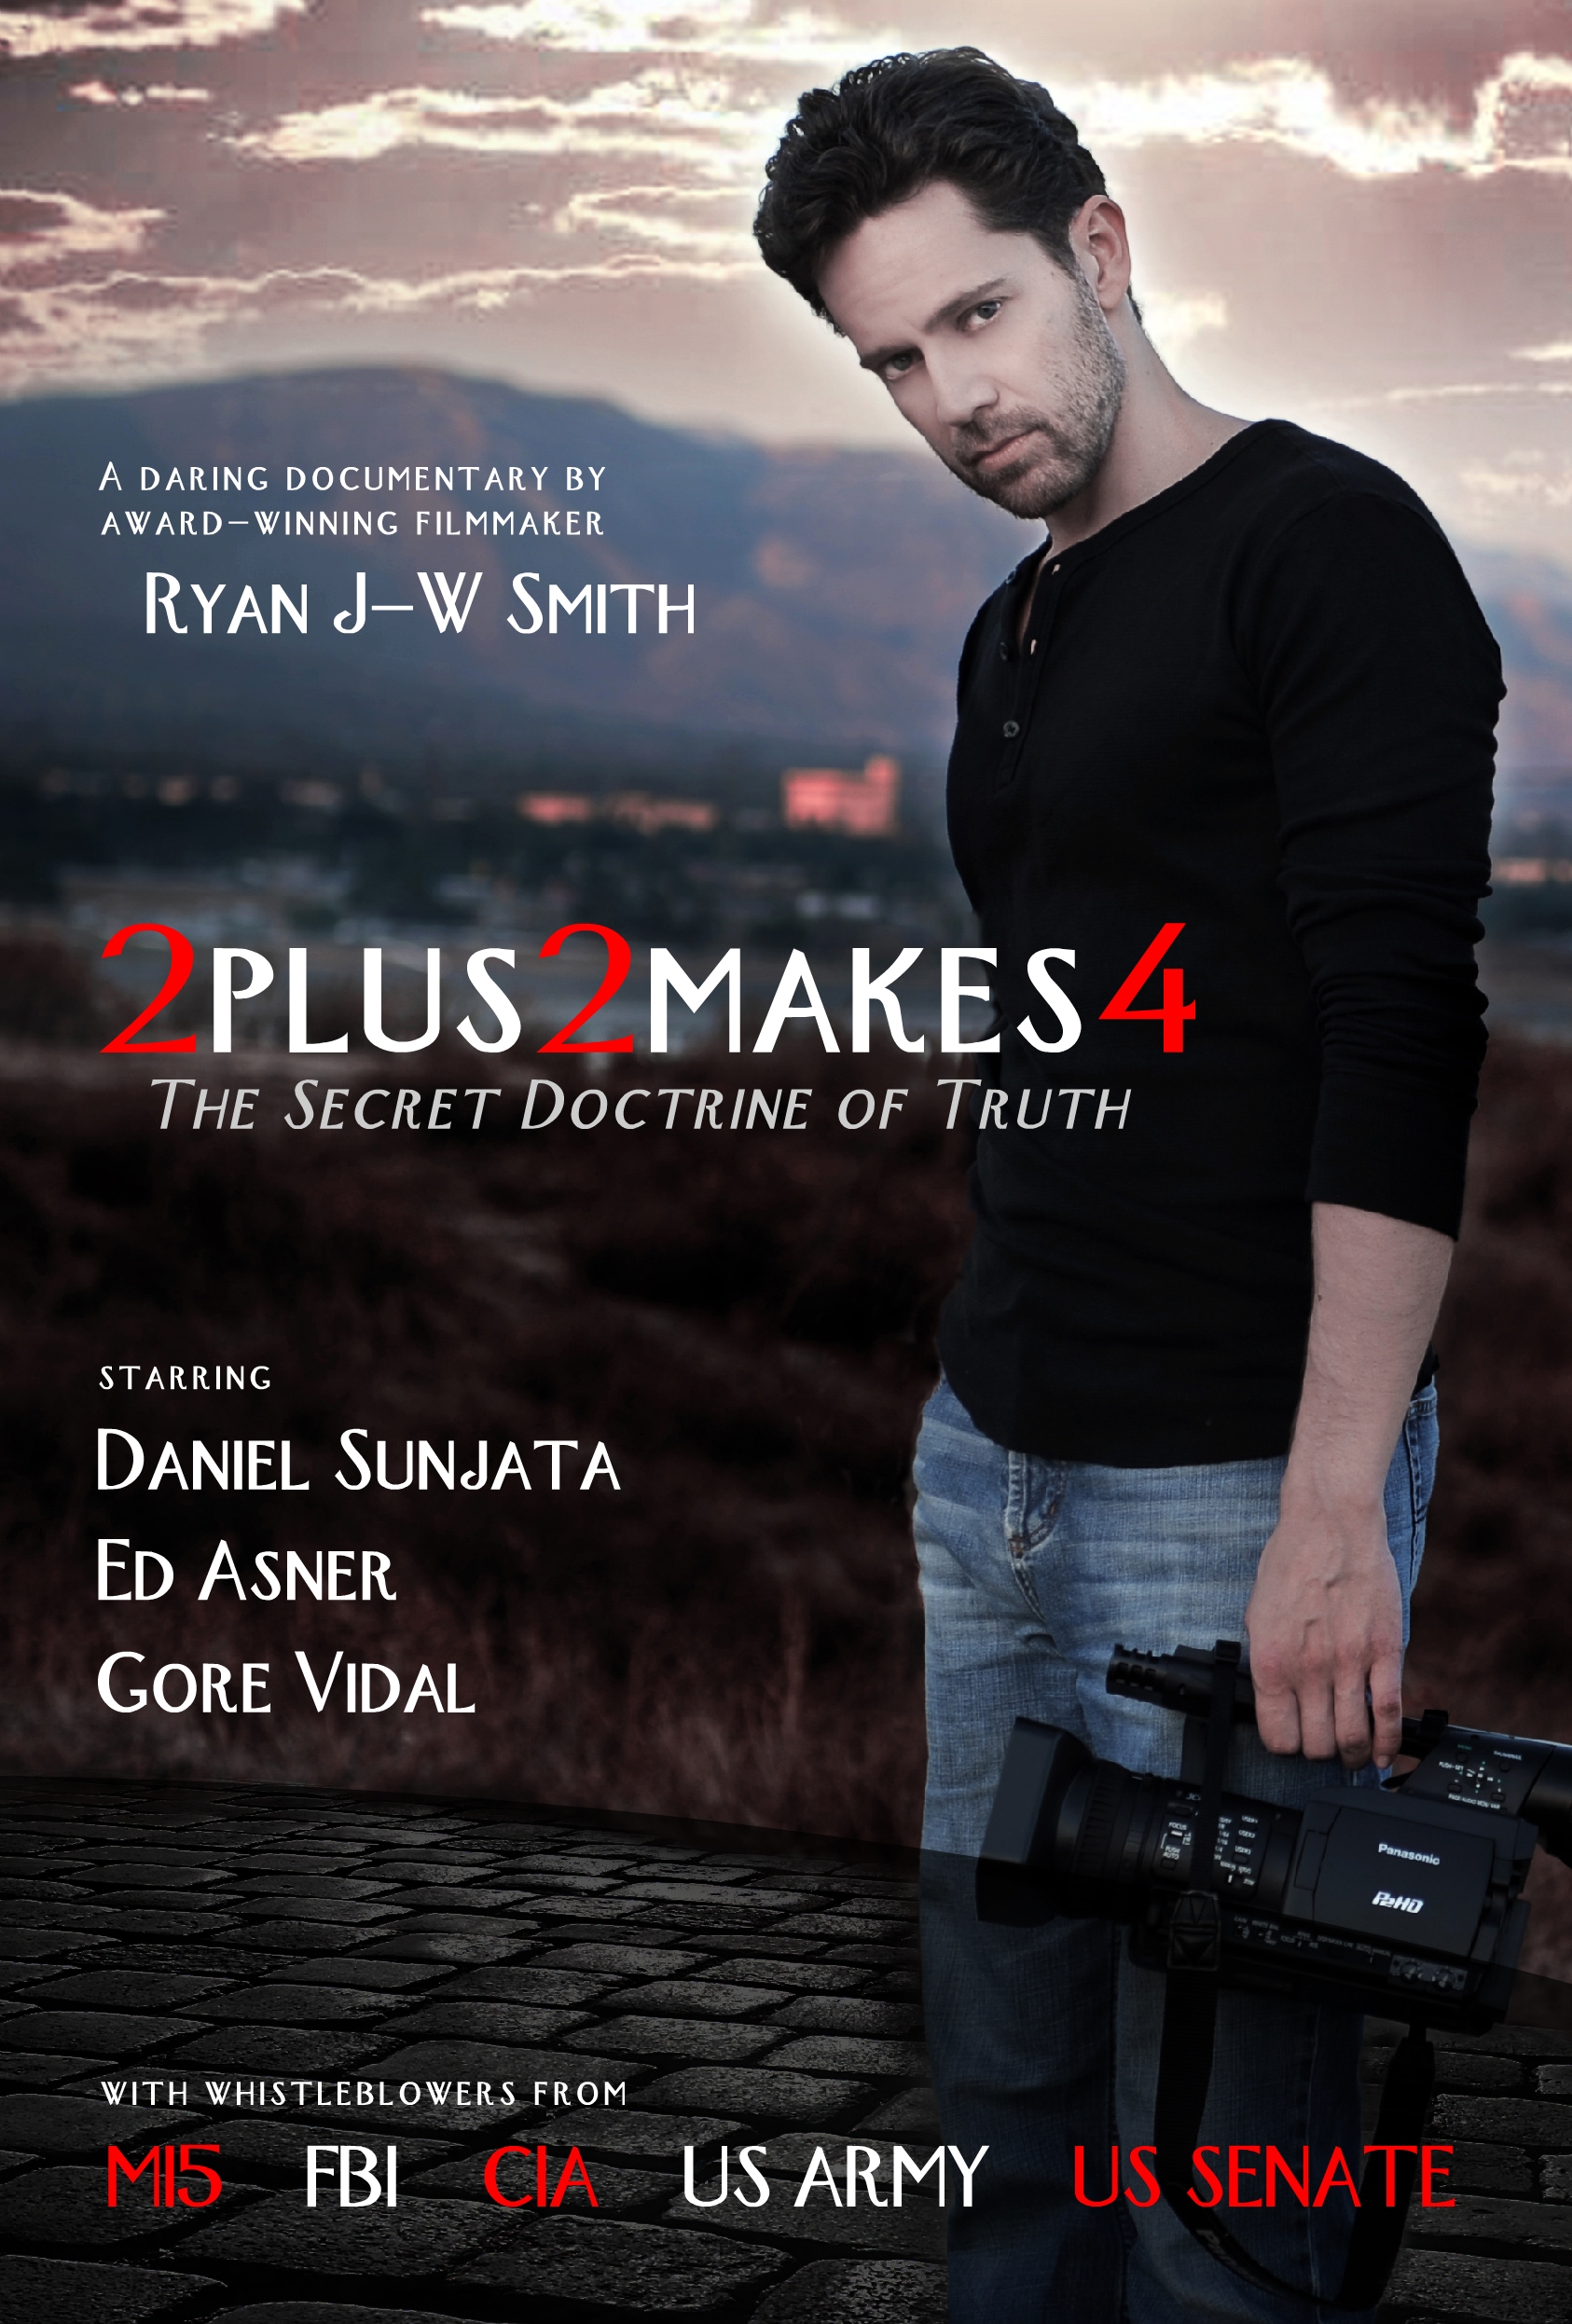 Poster for Ryan J-W Smith's feature film '2plus2makes4' (in production)